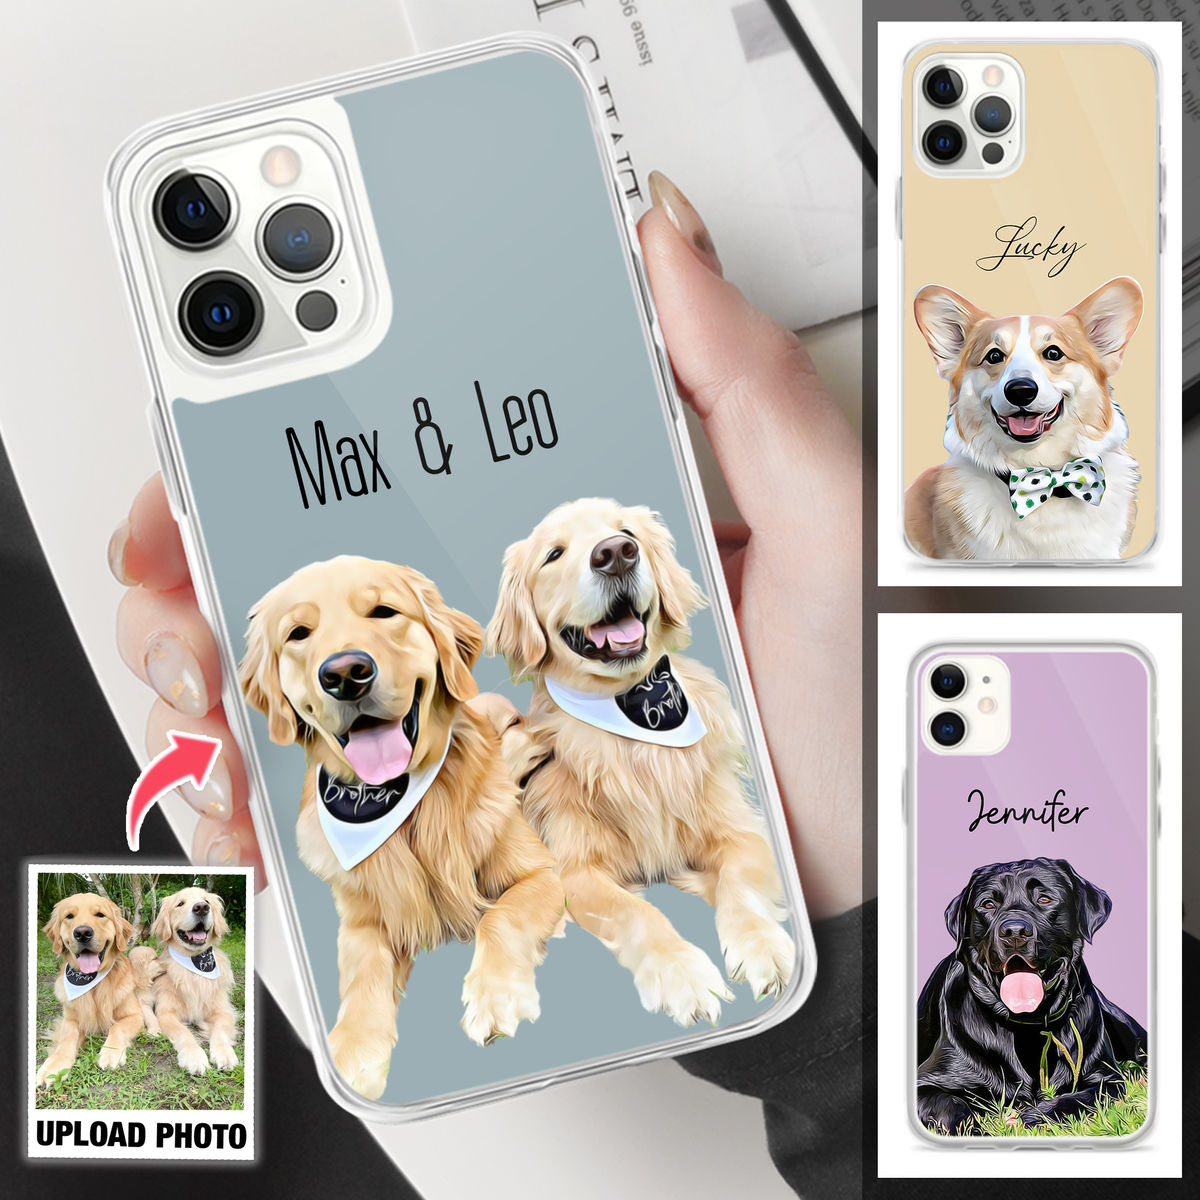 Dog Lover Gifts - Pet Lover Gifts - Dog Portrait - Digital Oil Painting - Custom Phone Case From Photo